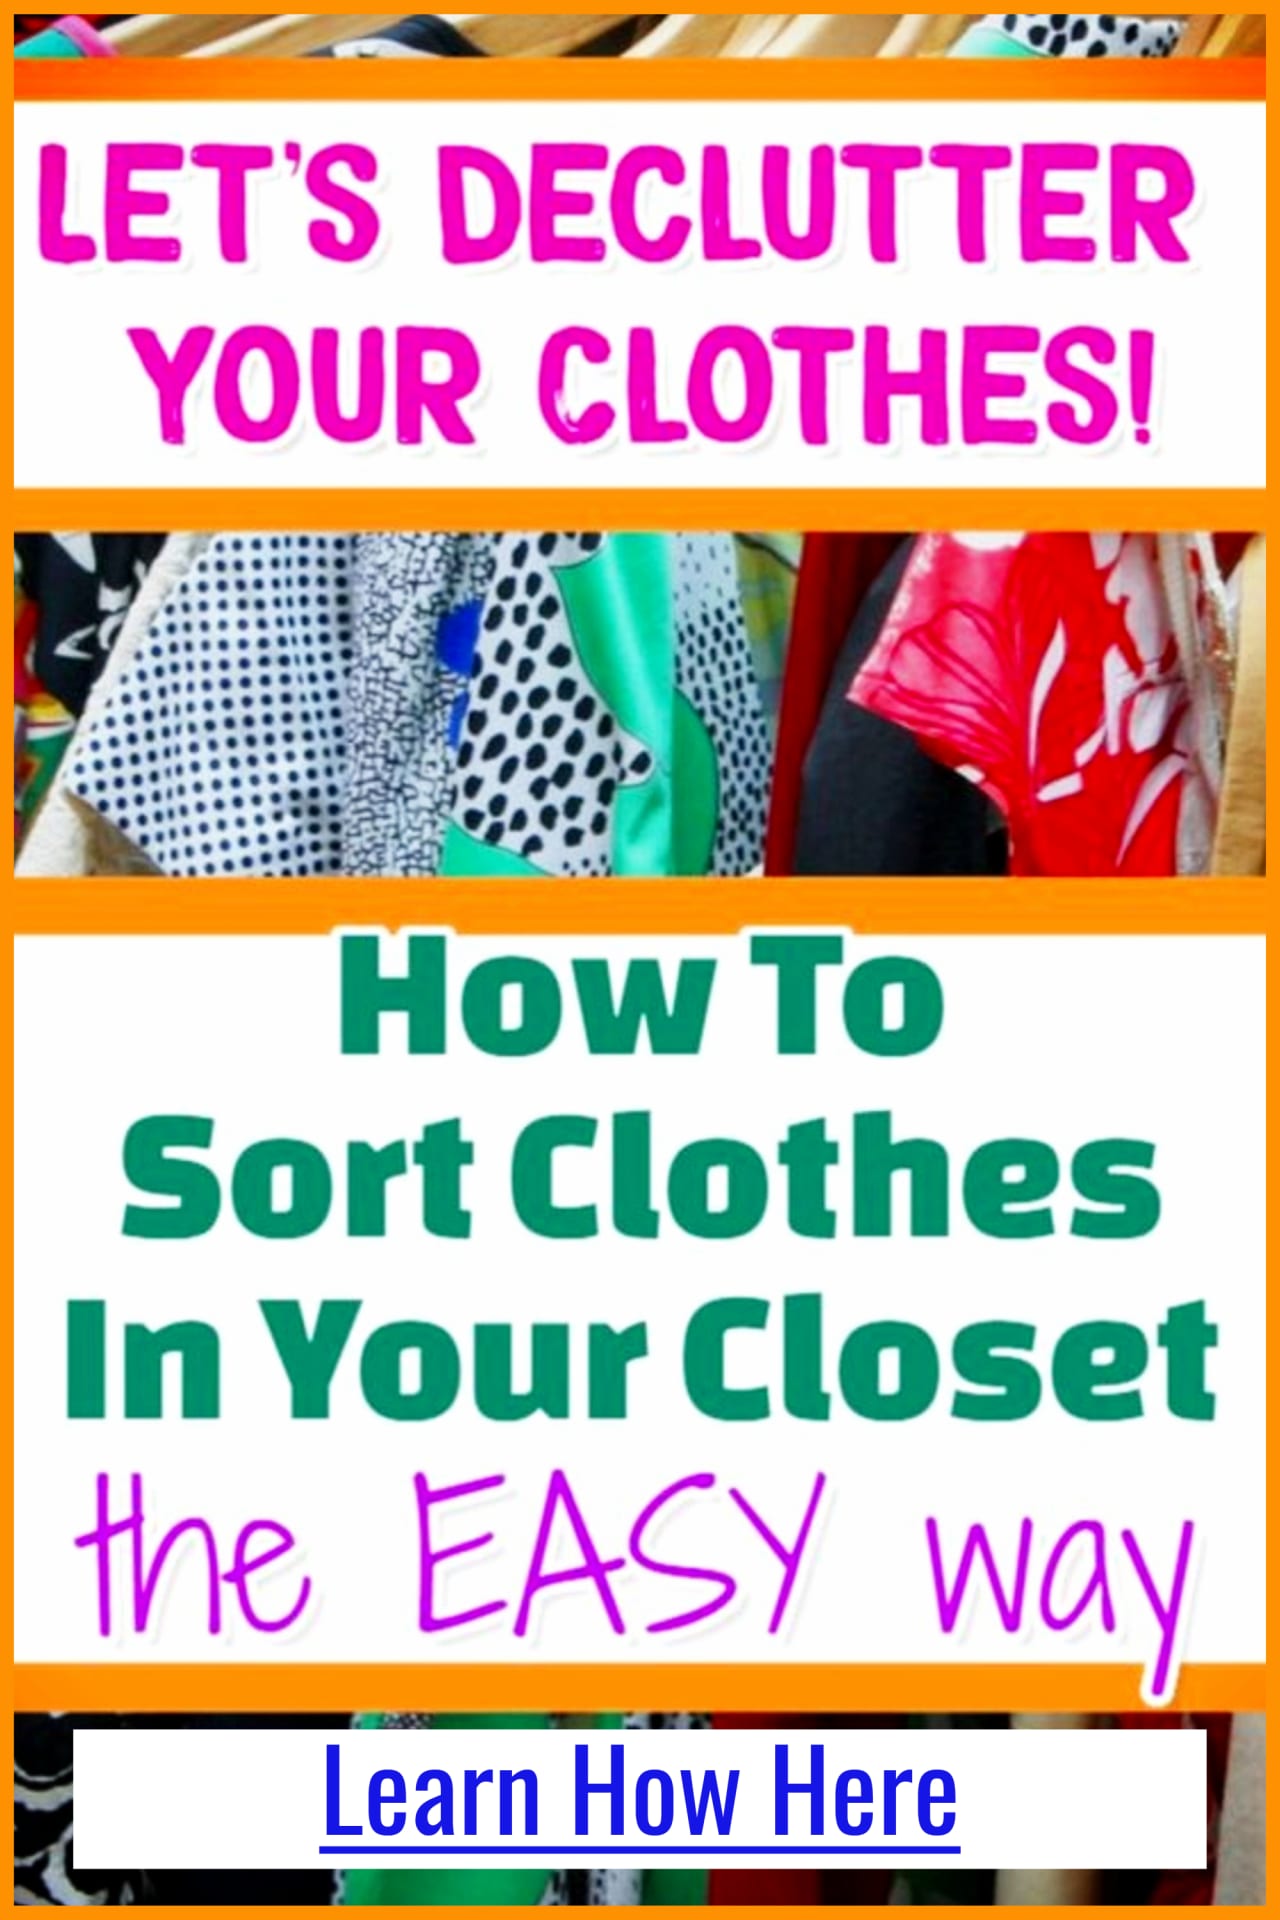 Clothes organization and closet organization ideas - Easy Decluttering Tips and Organizing Ideas For The Home - Decluttering Ideas if you're feeling overwhelmed - where to start decluttering and organizing your messy house - decluttering step by step to declutter and organize without feeling overwhelmed